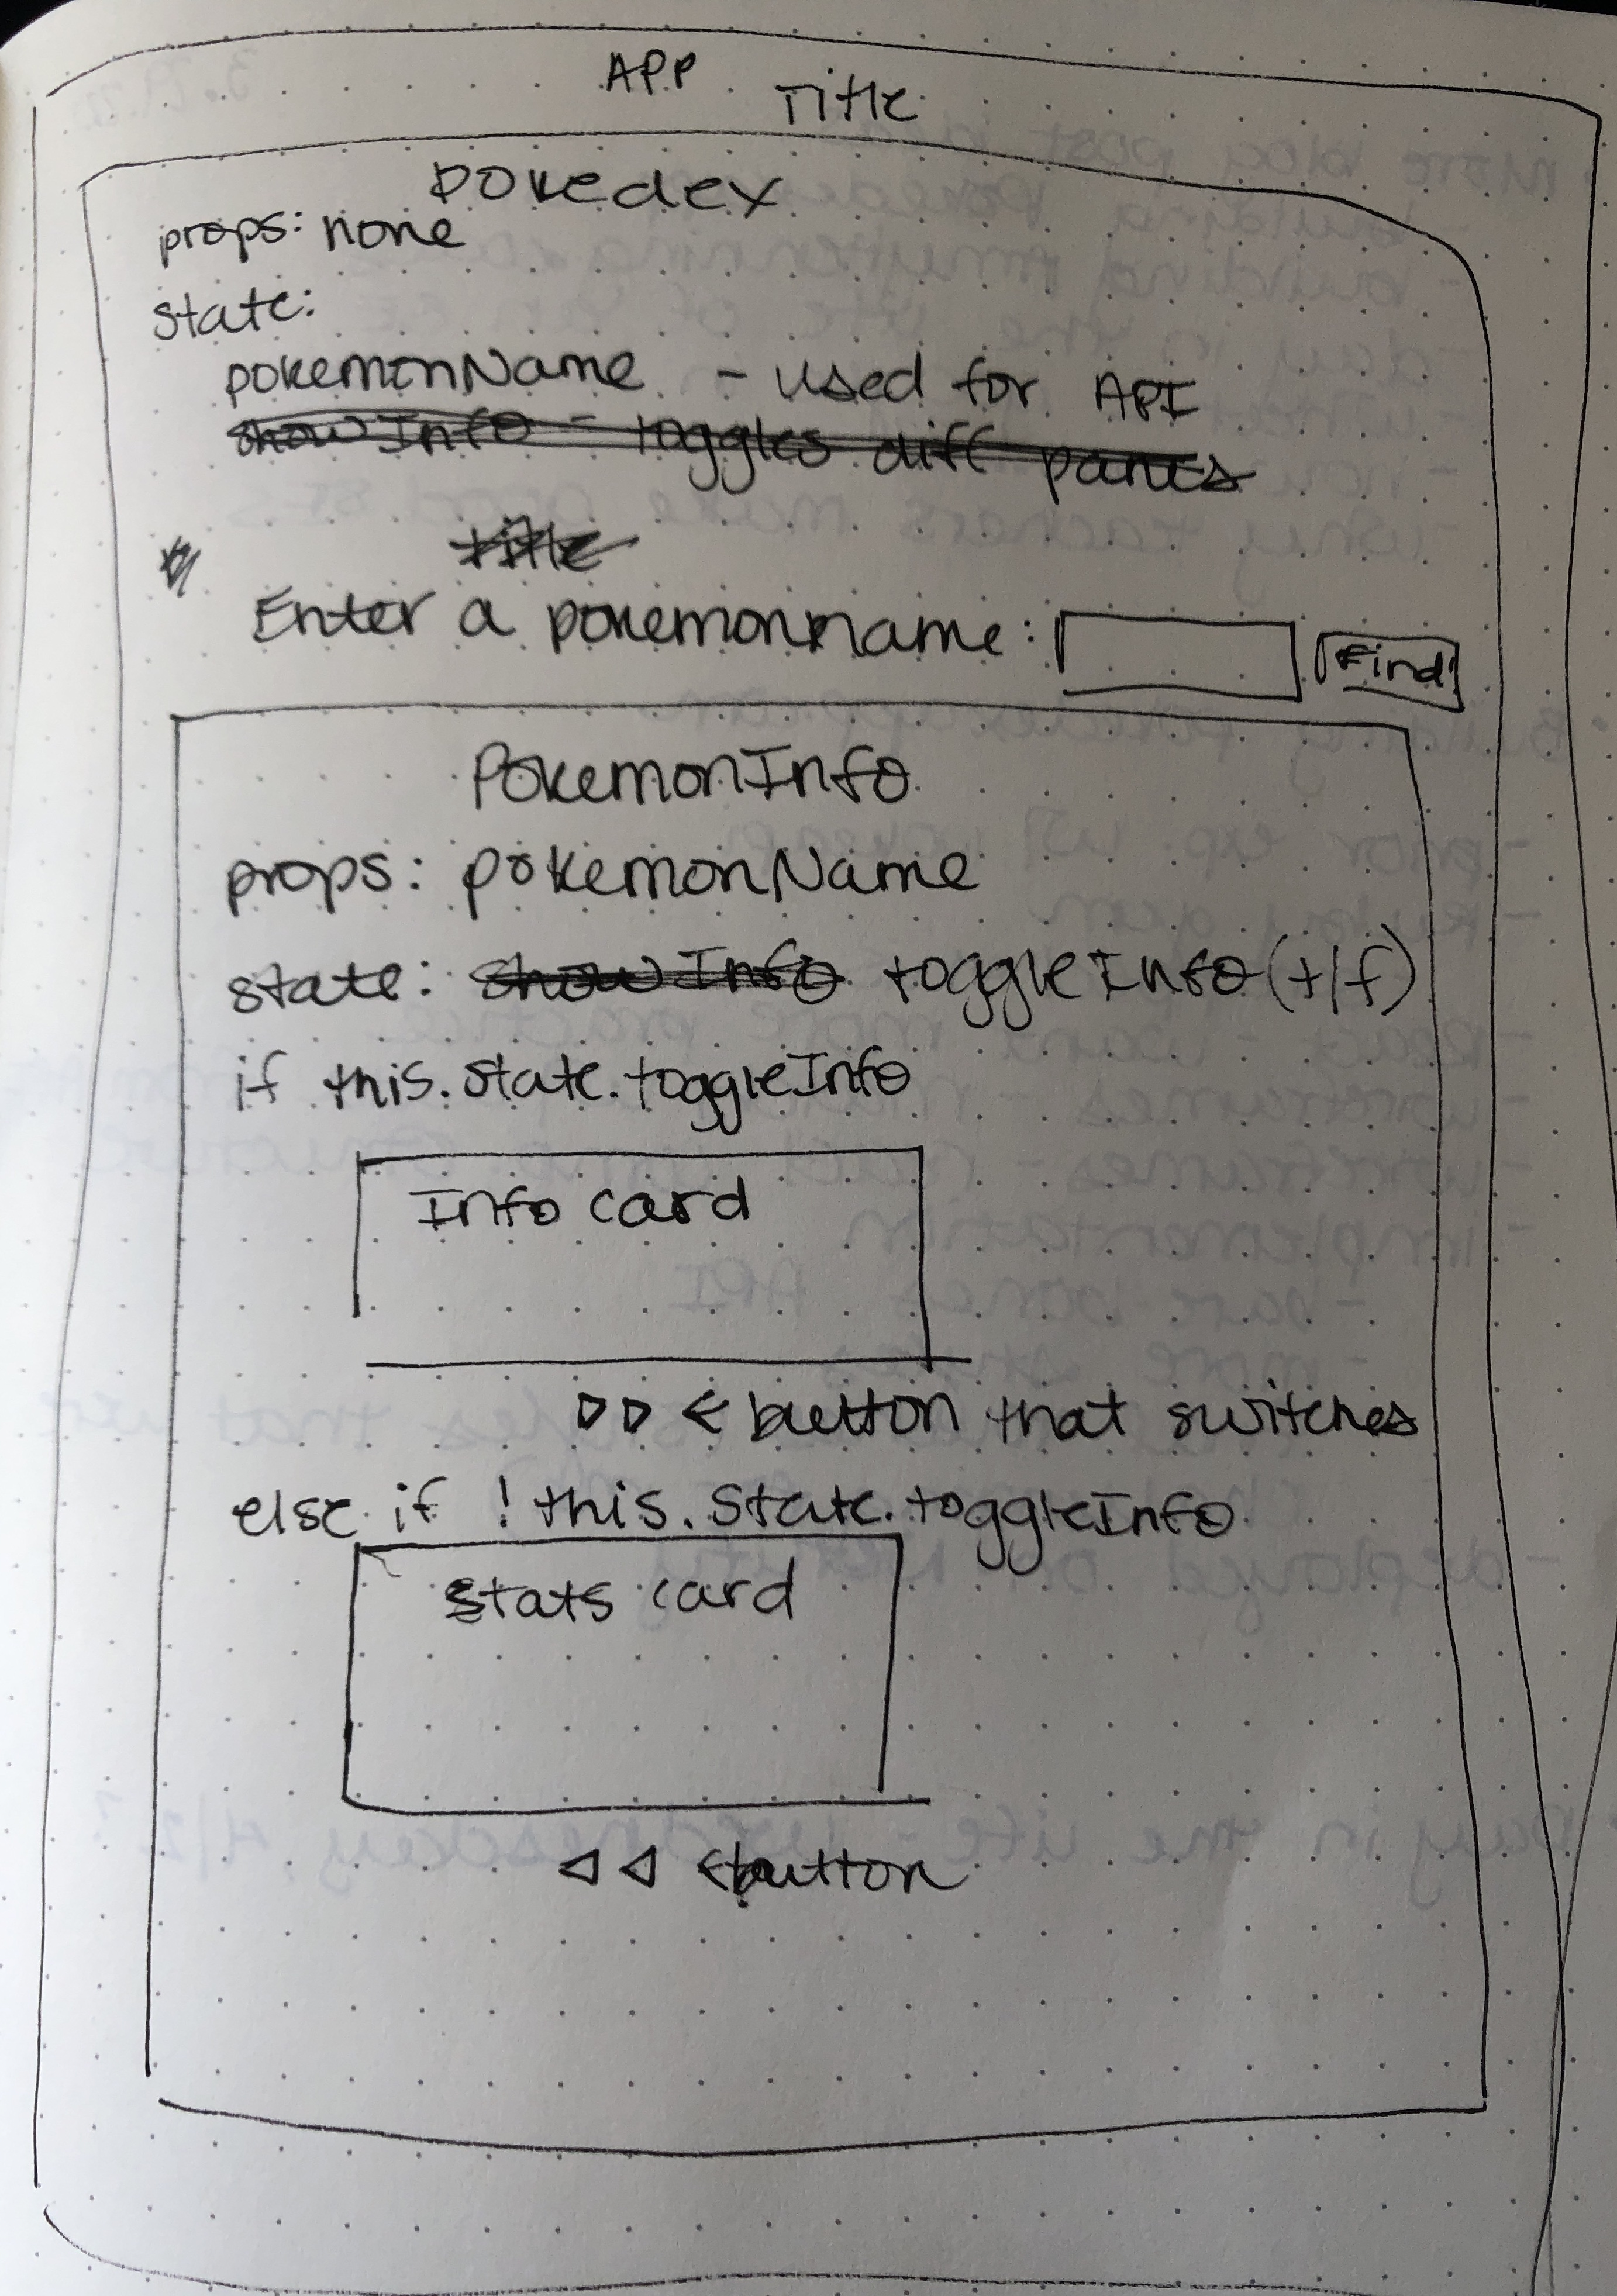 Another page from my notebook with a sketch of the components